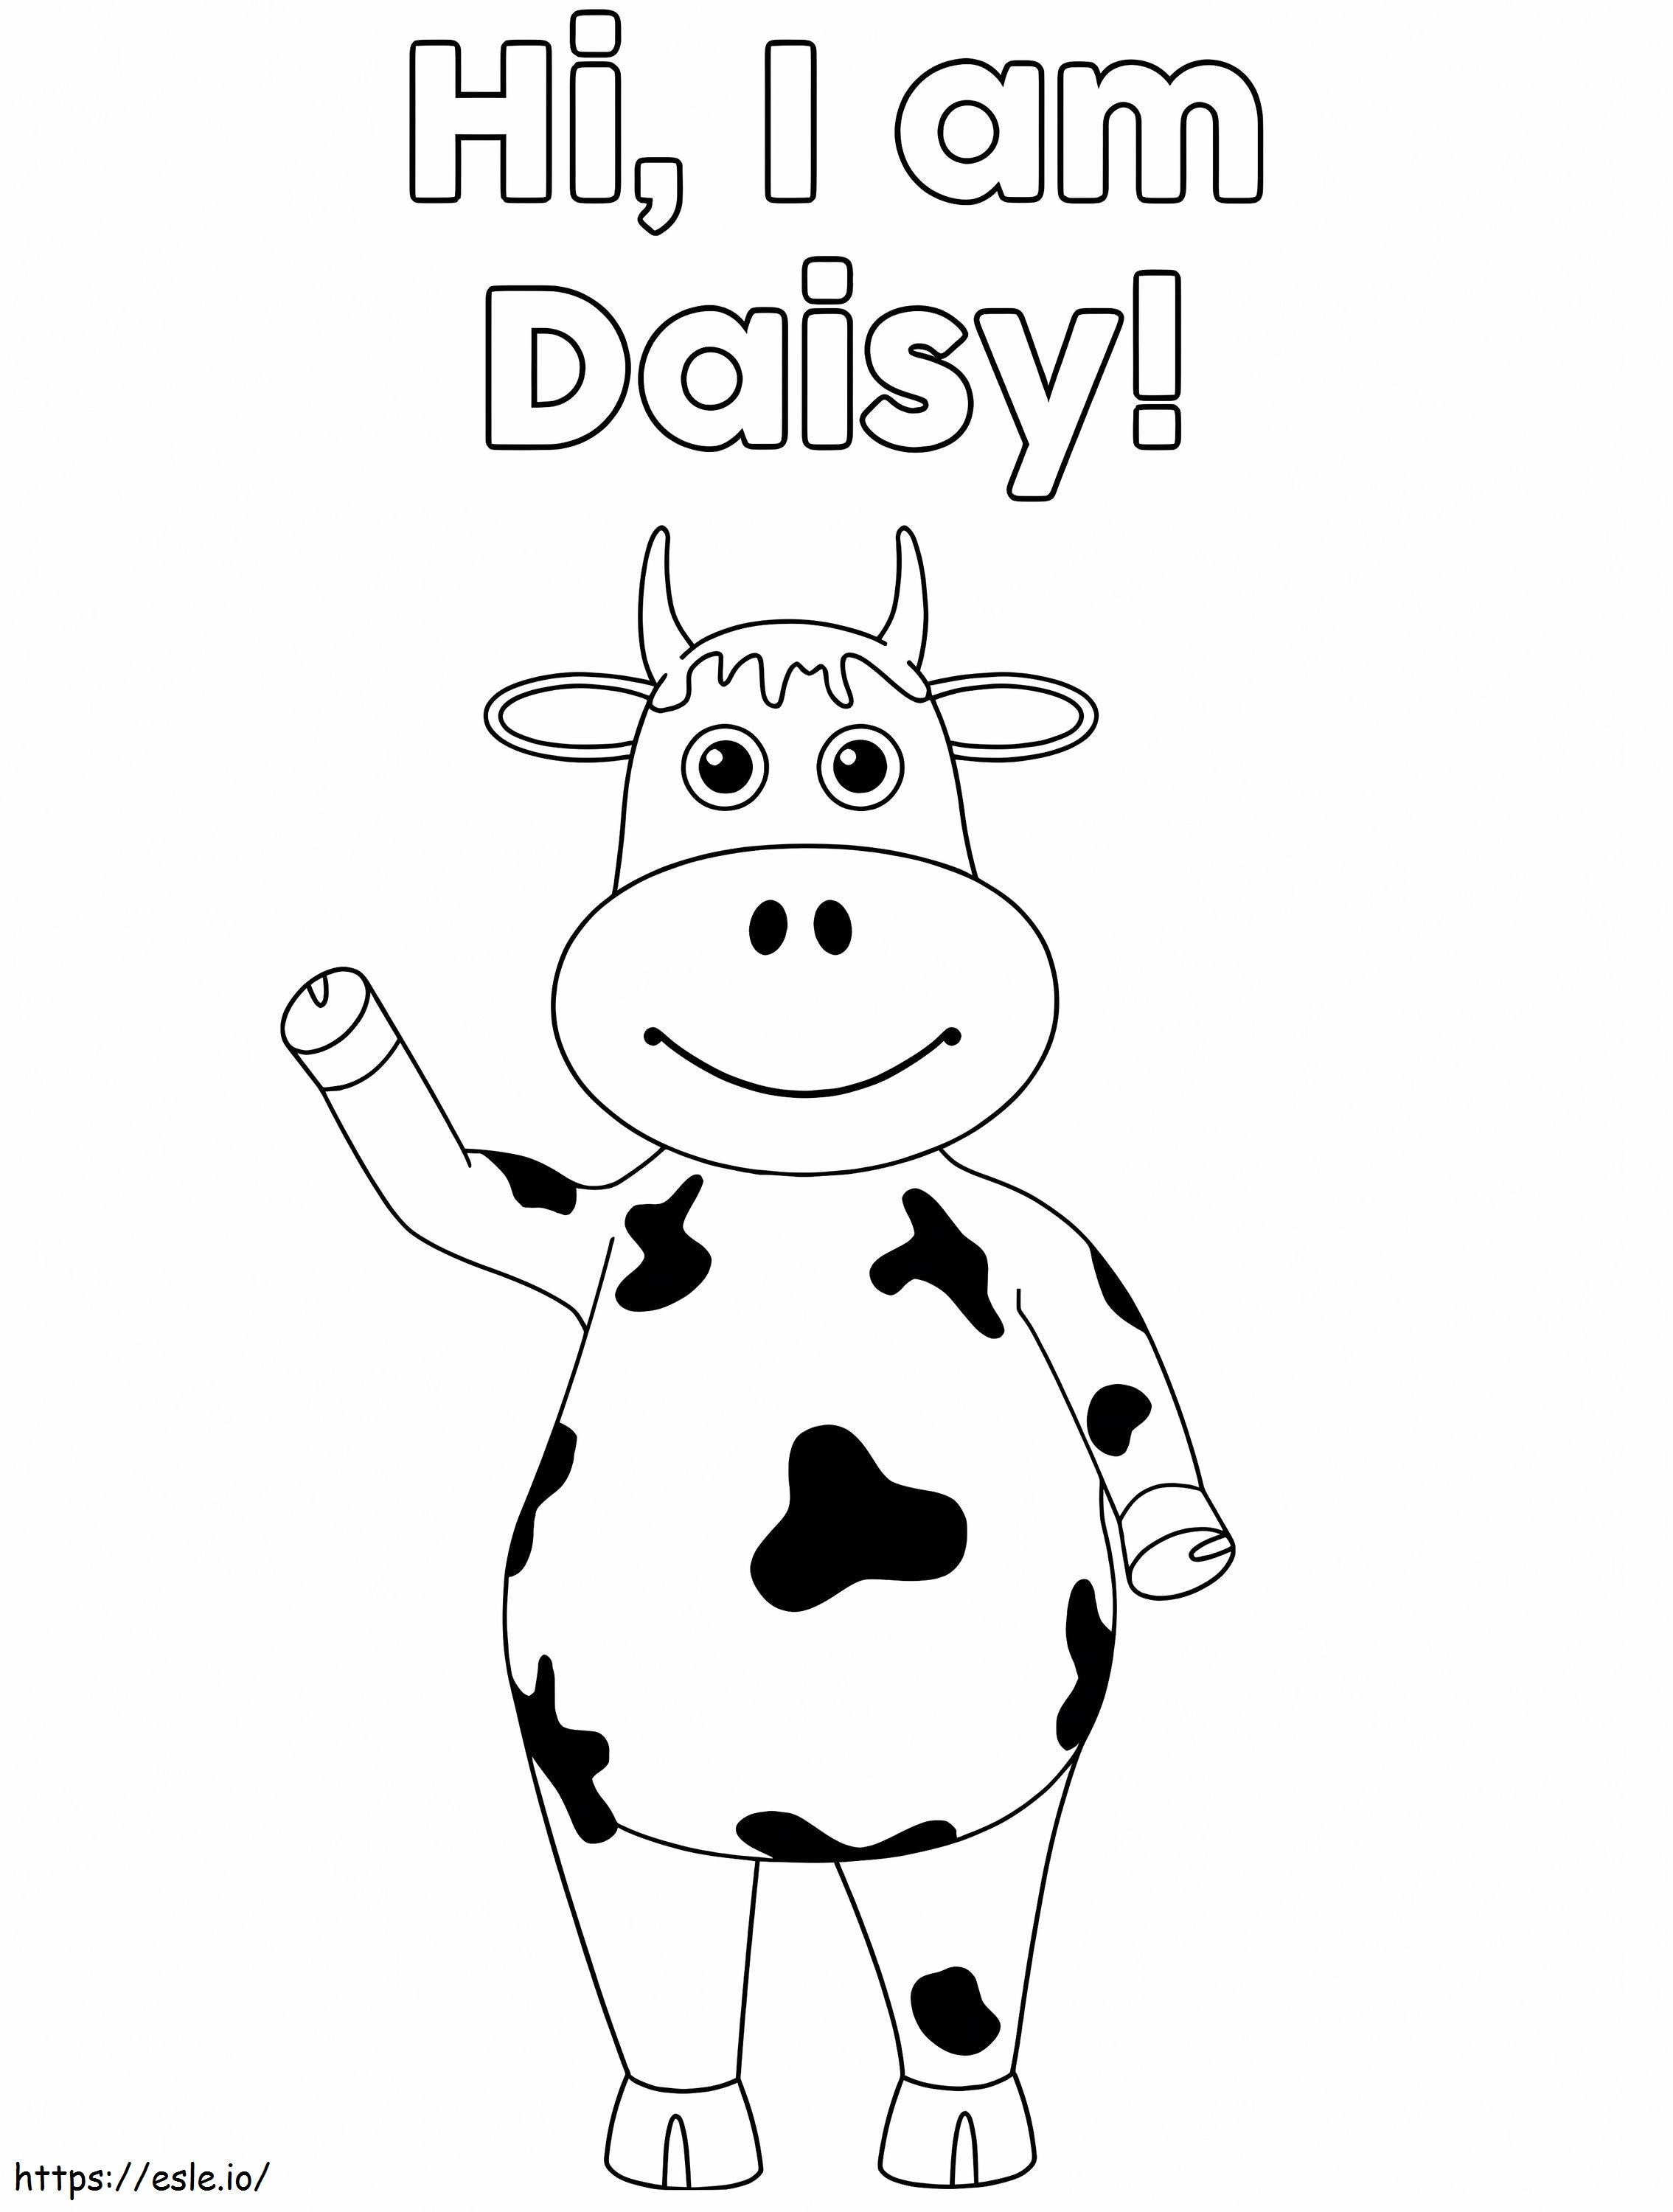 Daisy Little Baby Bum coloring page